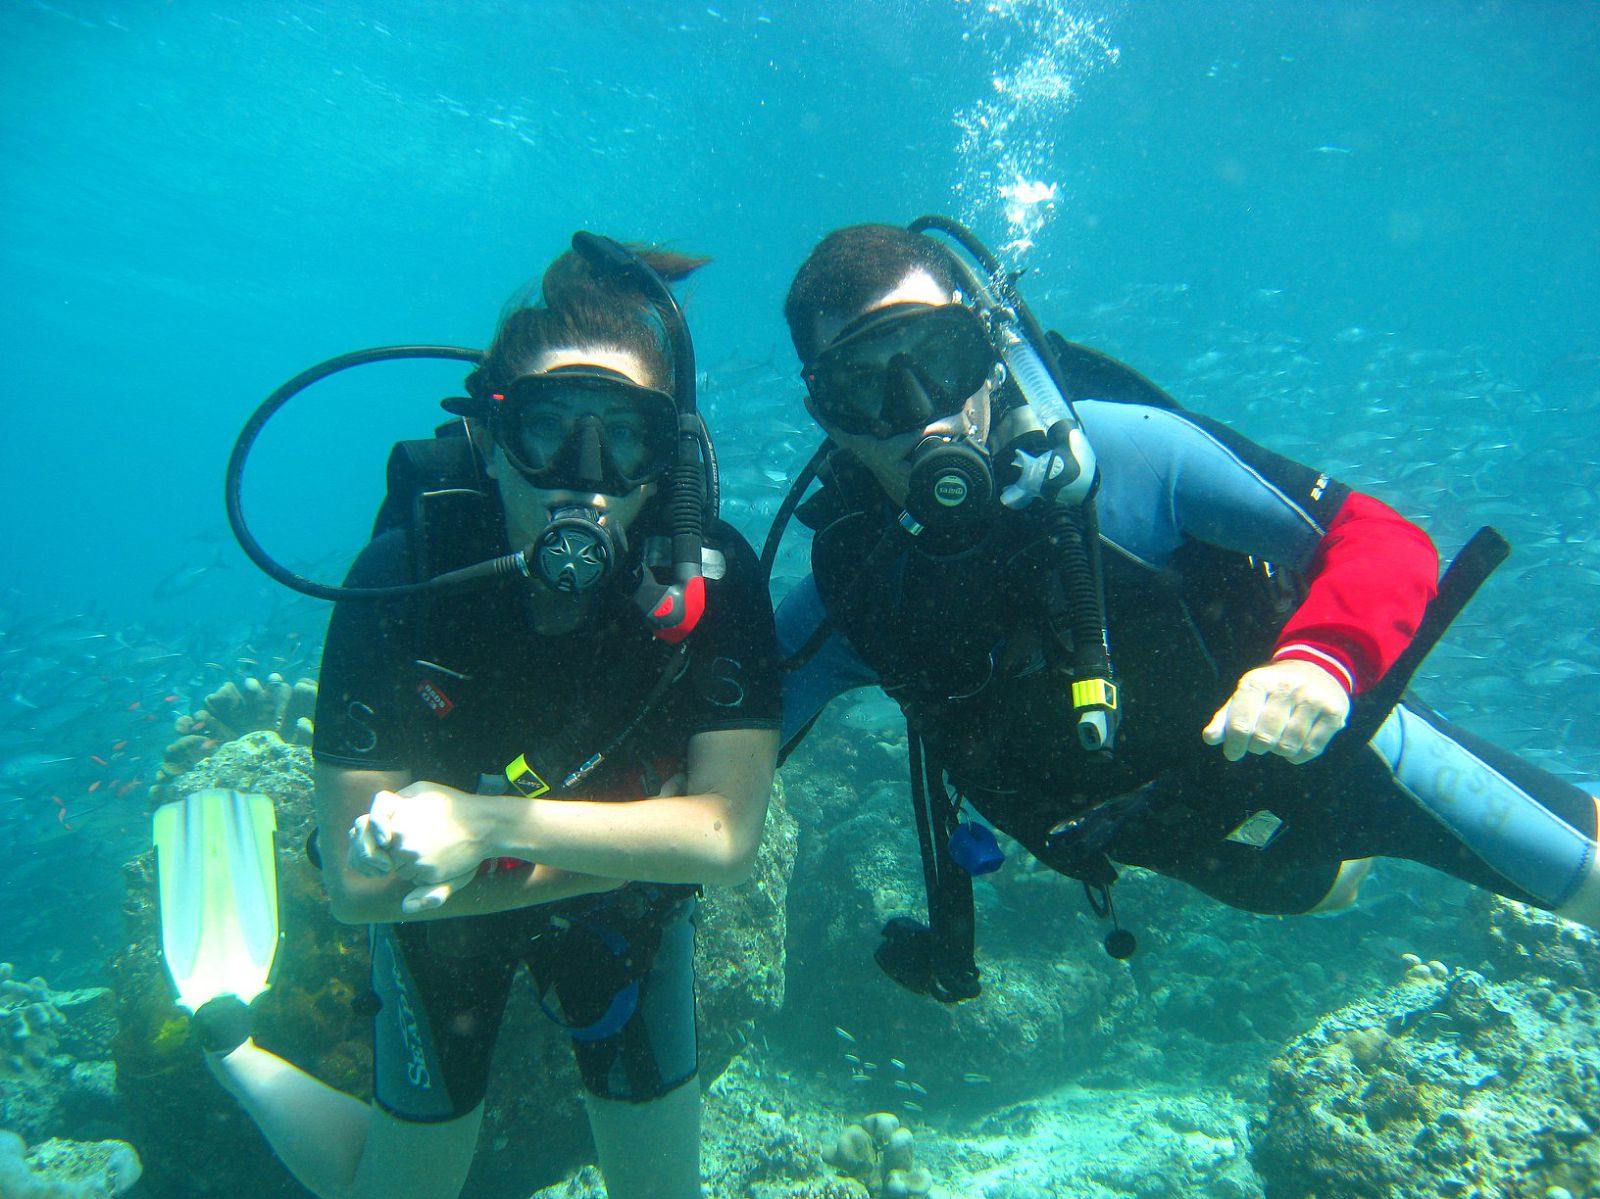 Lisa was proposed to underwater in Thailand!